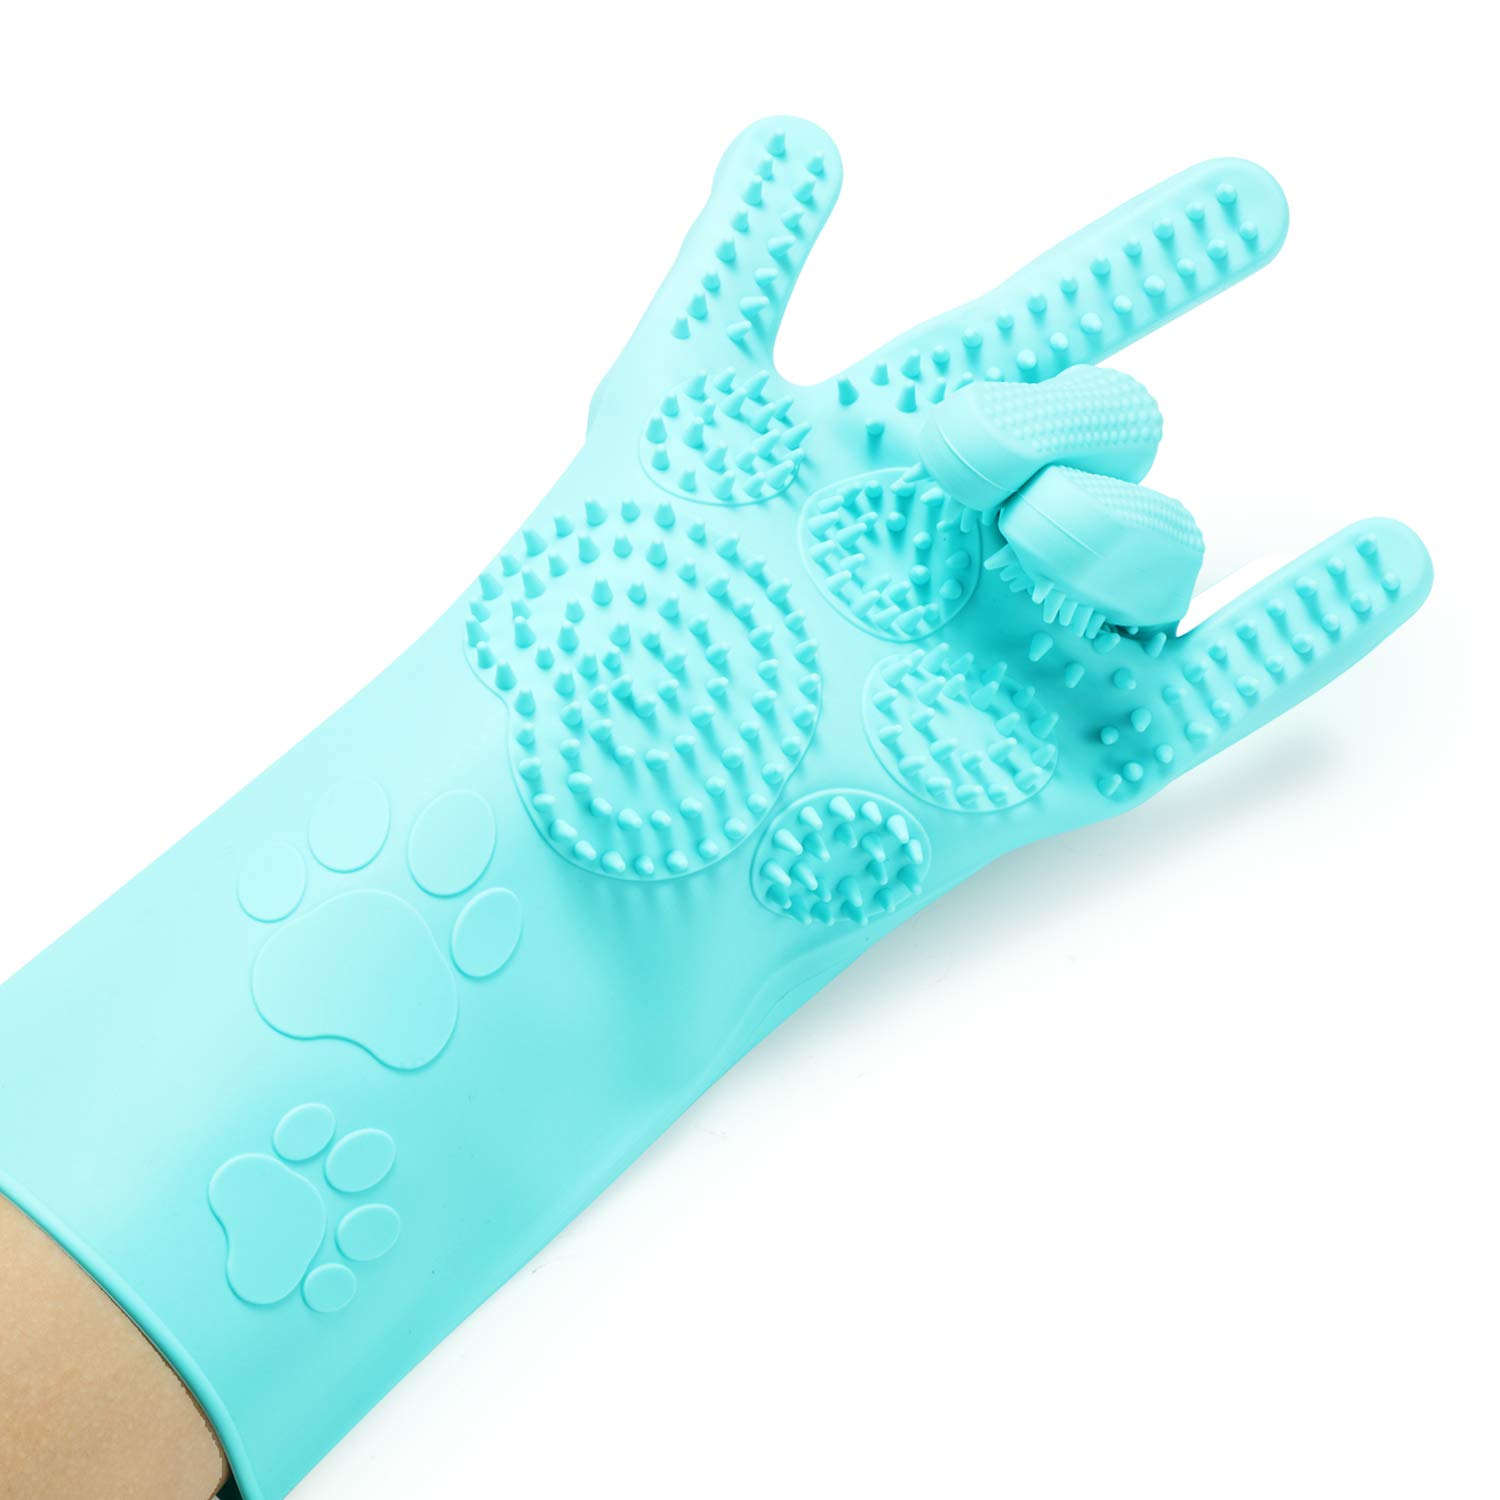 Silicone Hair Removal Gloves with Thick High Density Teeth for Bathing and Messaging